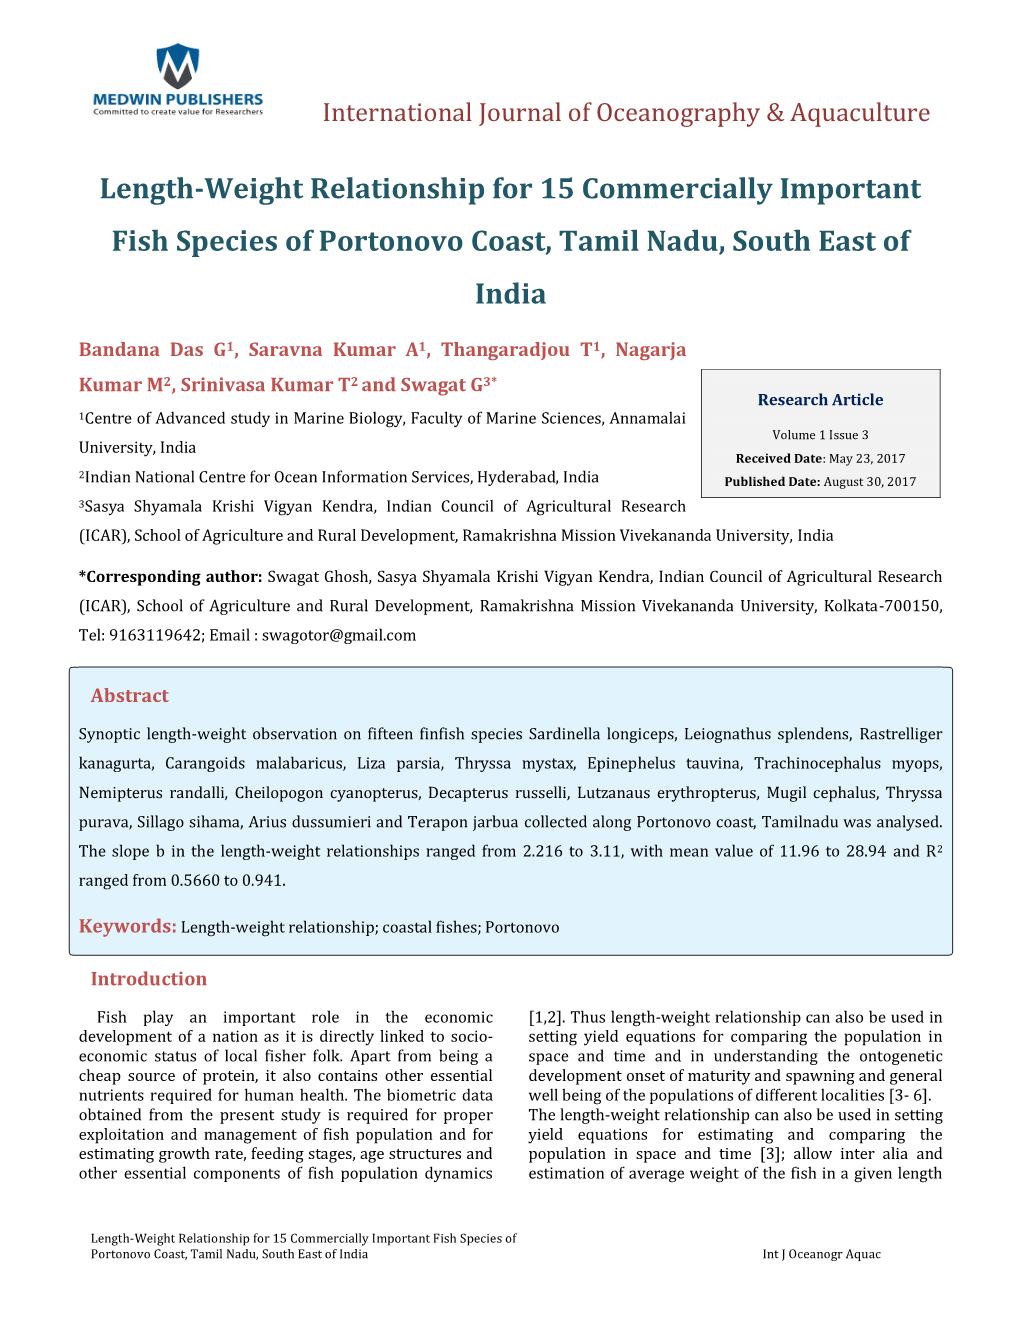 Length-Weight Relationship for 15 Commercially Important Fish Species of Portonovo Coast, Tamil Nadu, South East of India